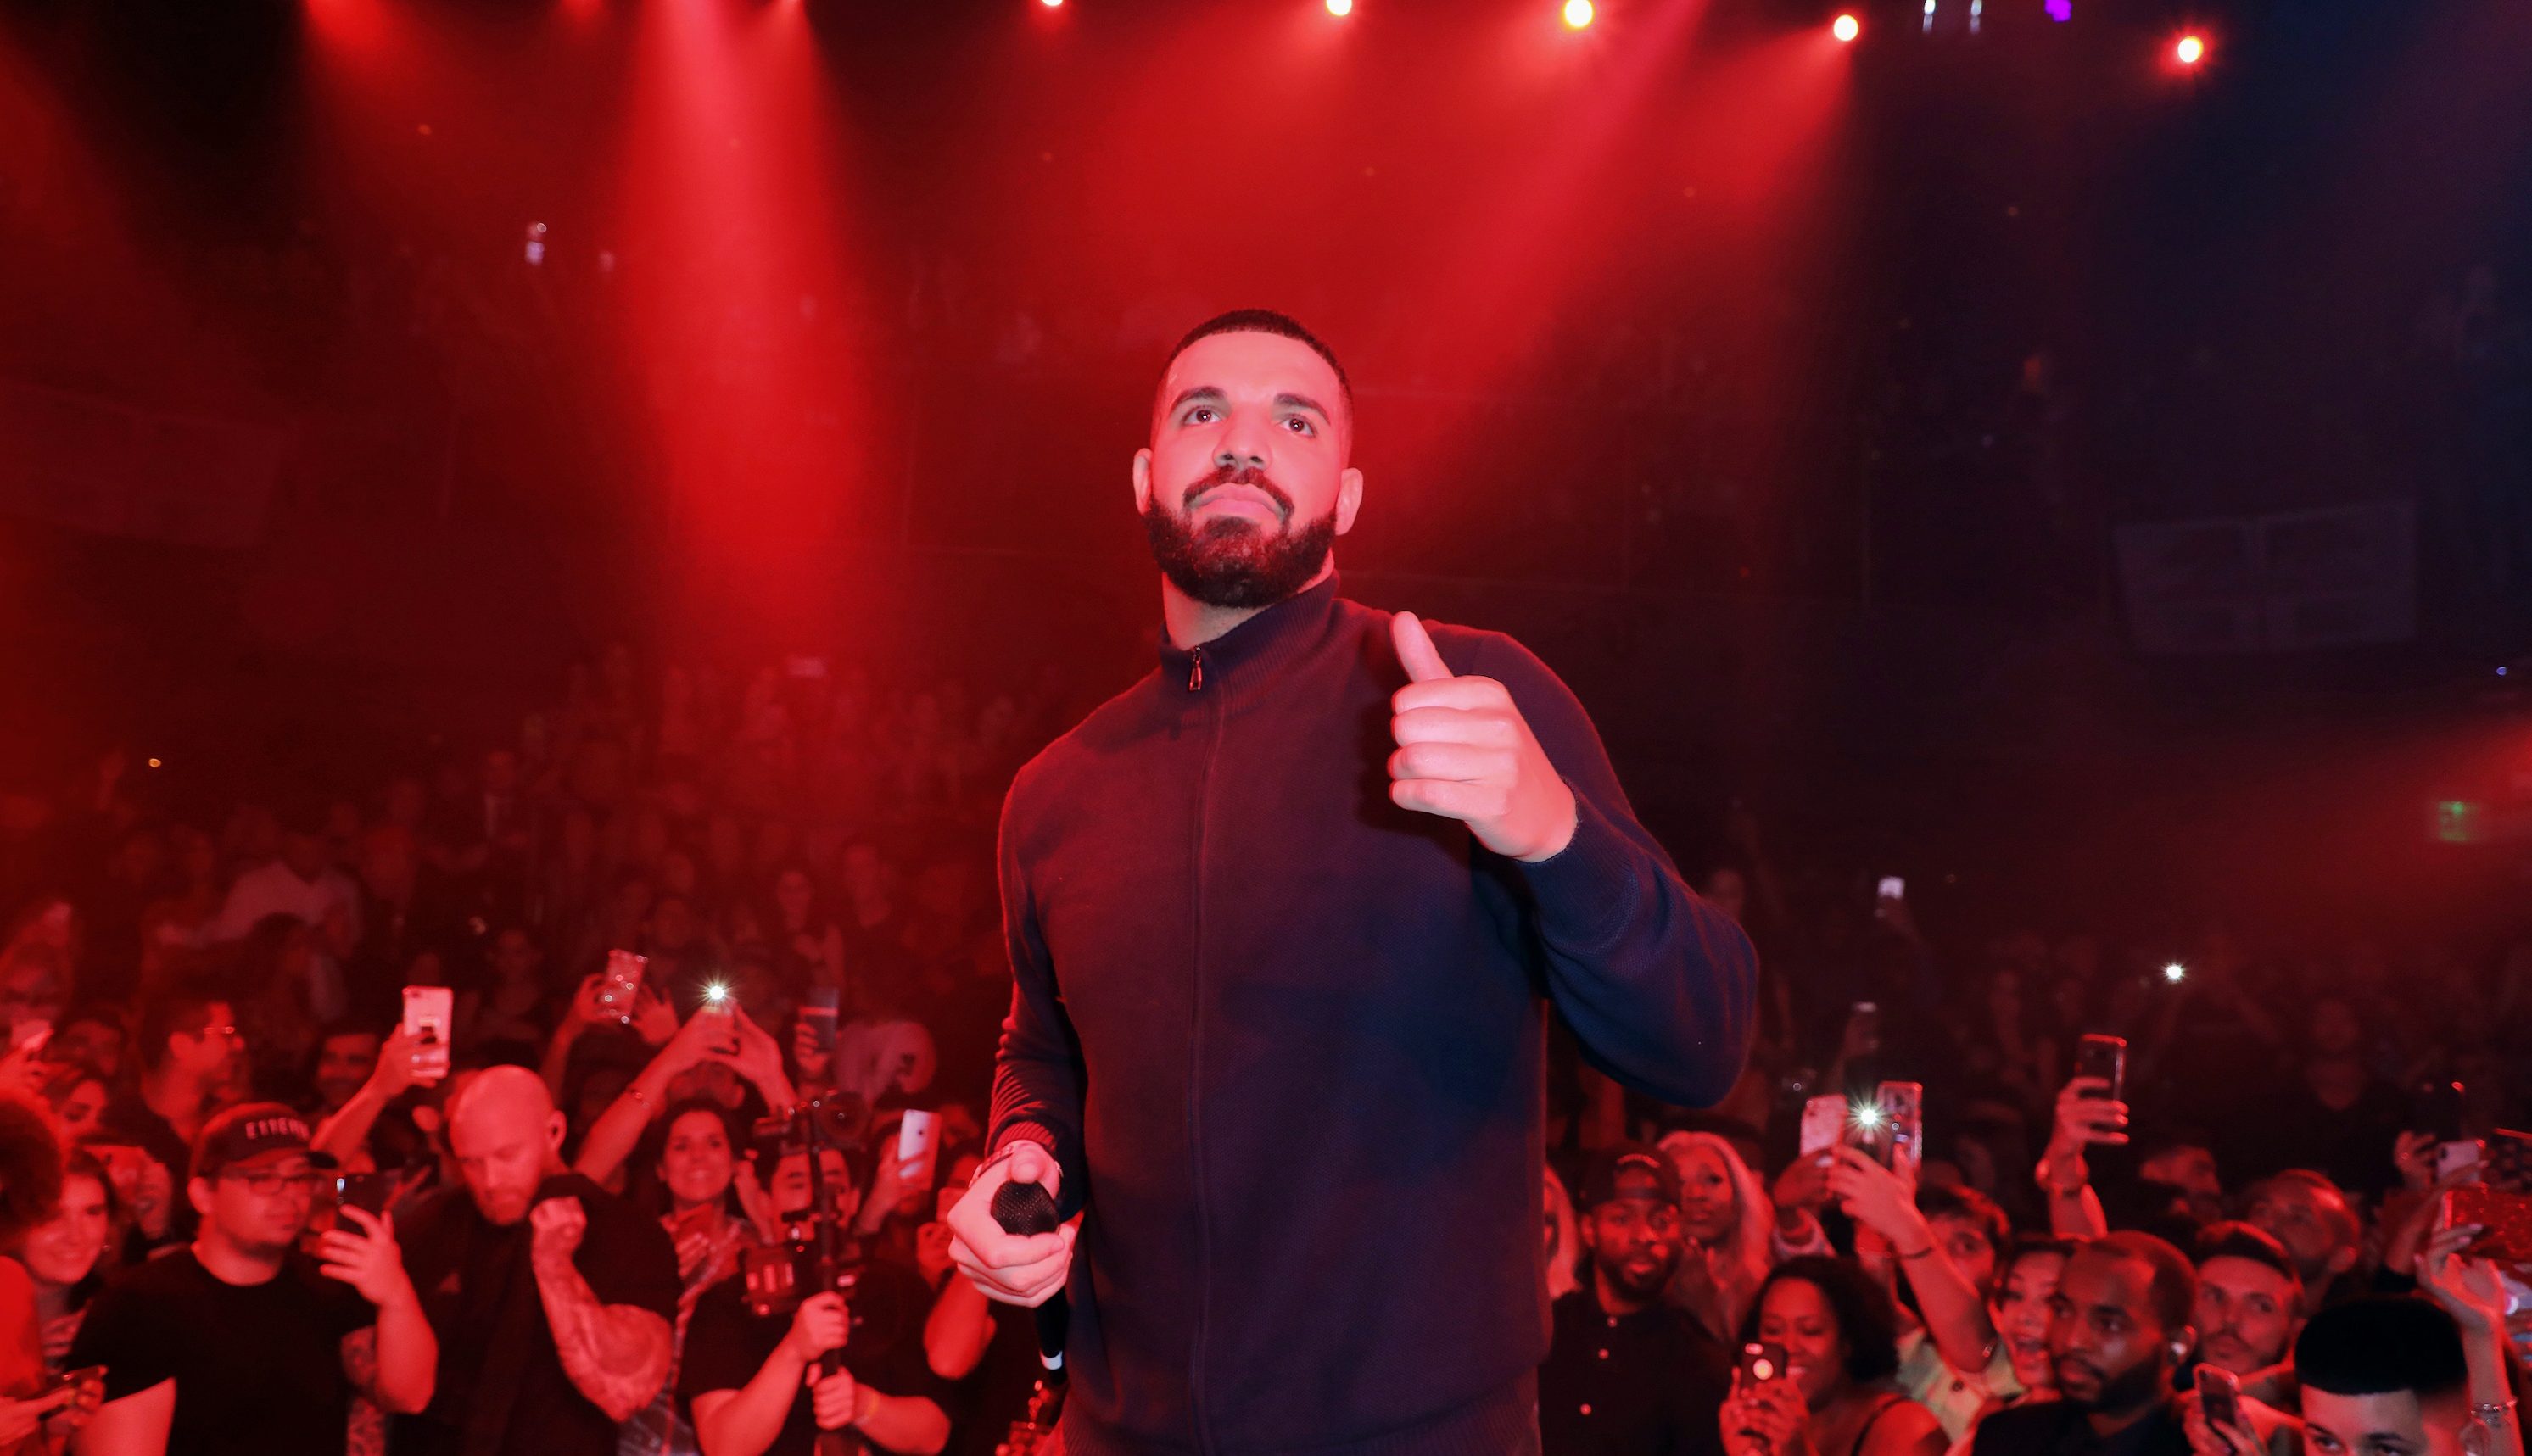 Someone Hacks Drakes Gaming Account To Yell Slurs During Livestream